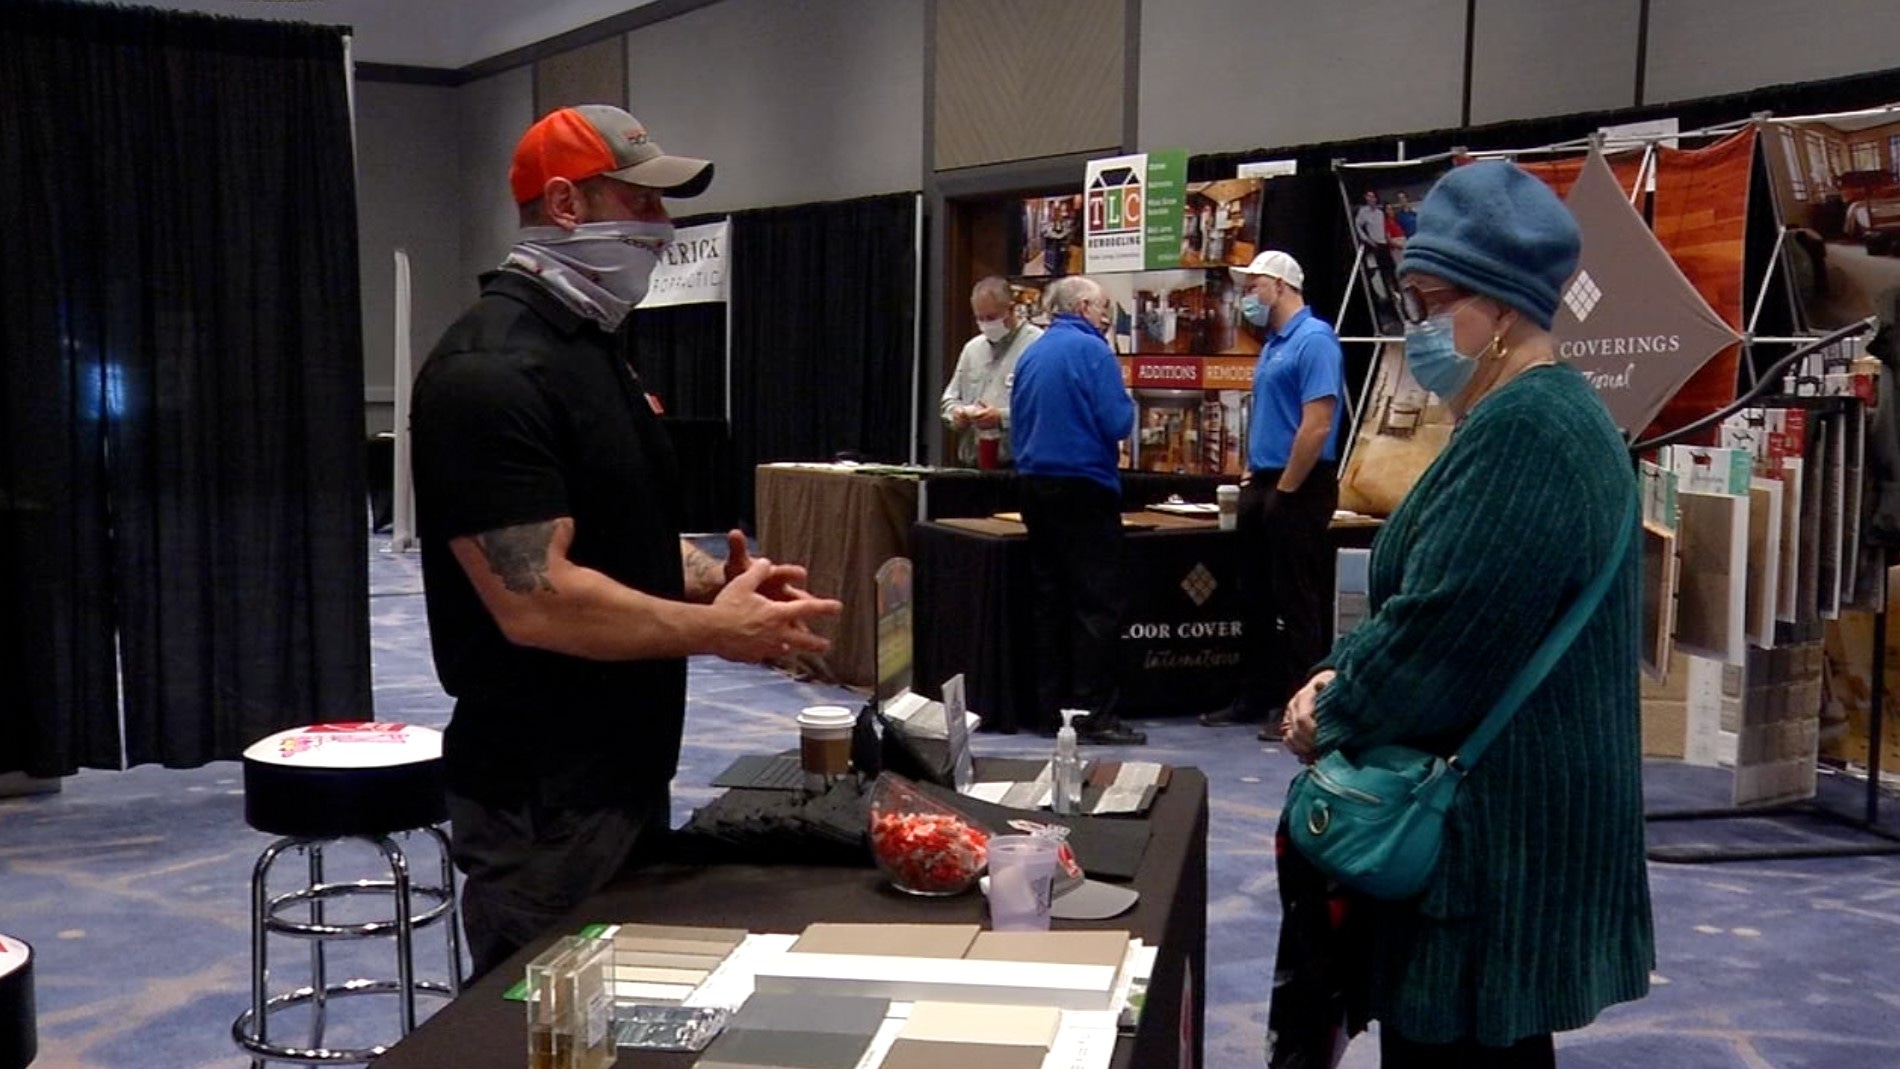 Home building expo returns to Minneapolis after pandemic pause